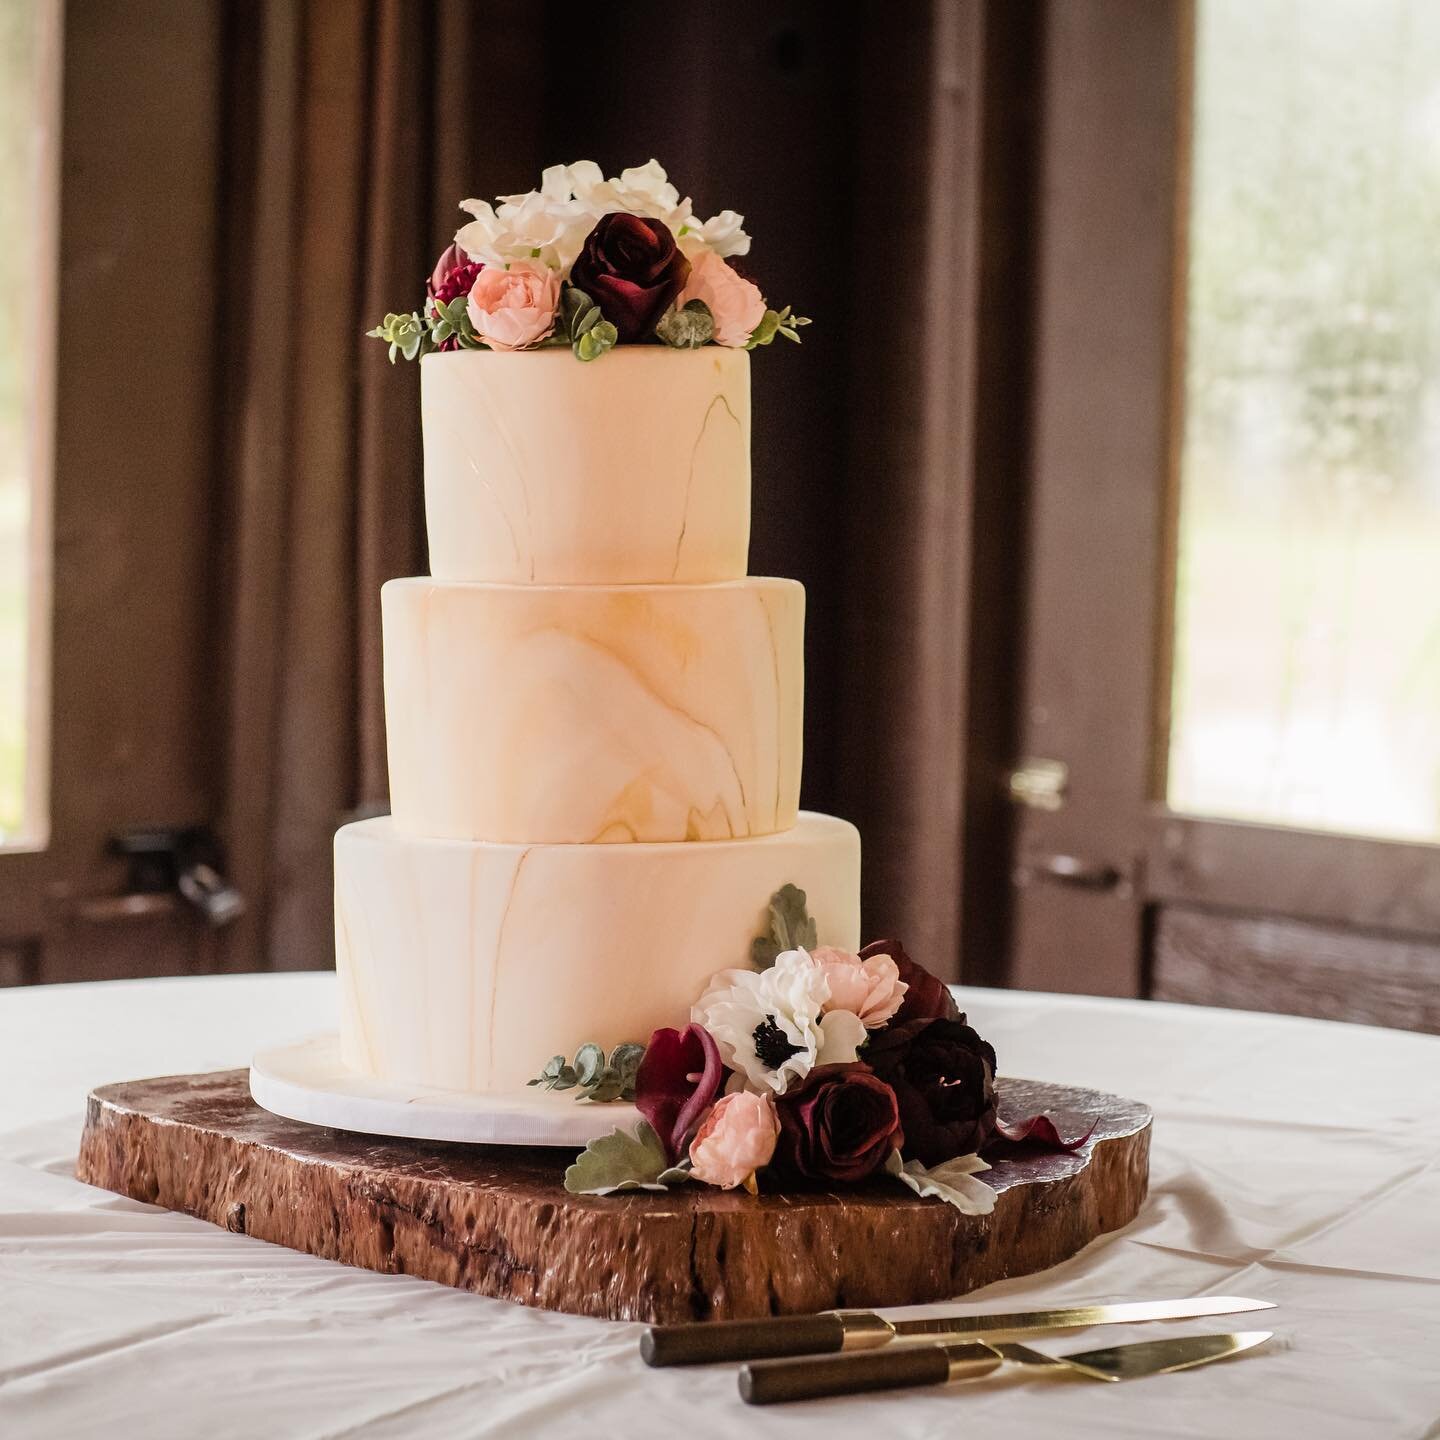 Doesn&rsquo;t this cake look amazing? Would you be shocked if I told you these were silk florals~ While there are are definitely differences when you look closely, we strive to give you the highest quality silk florals to rent so you don&rsquo;t have